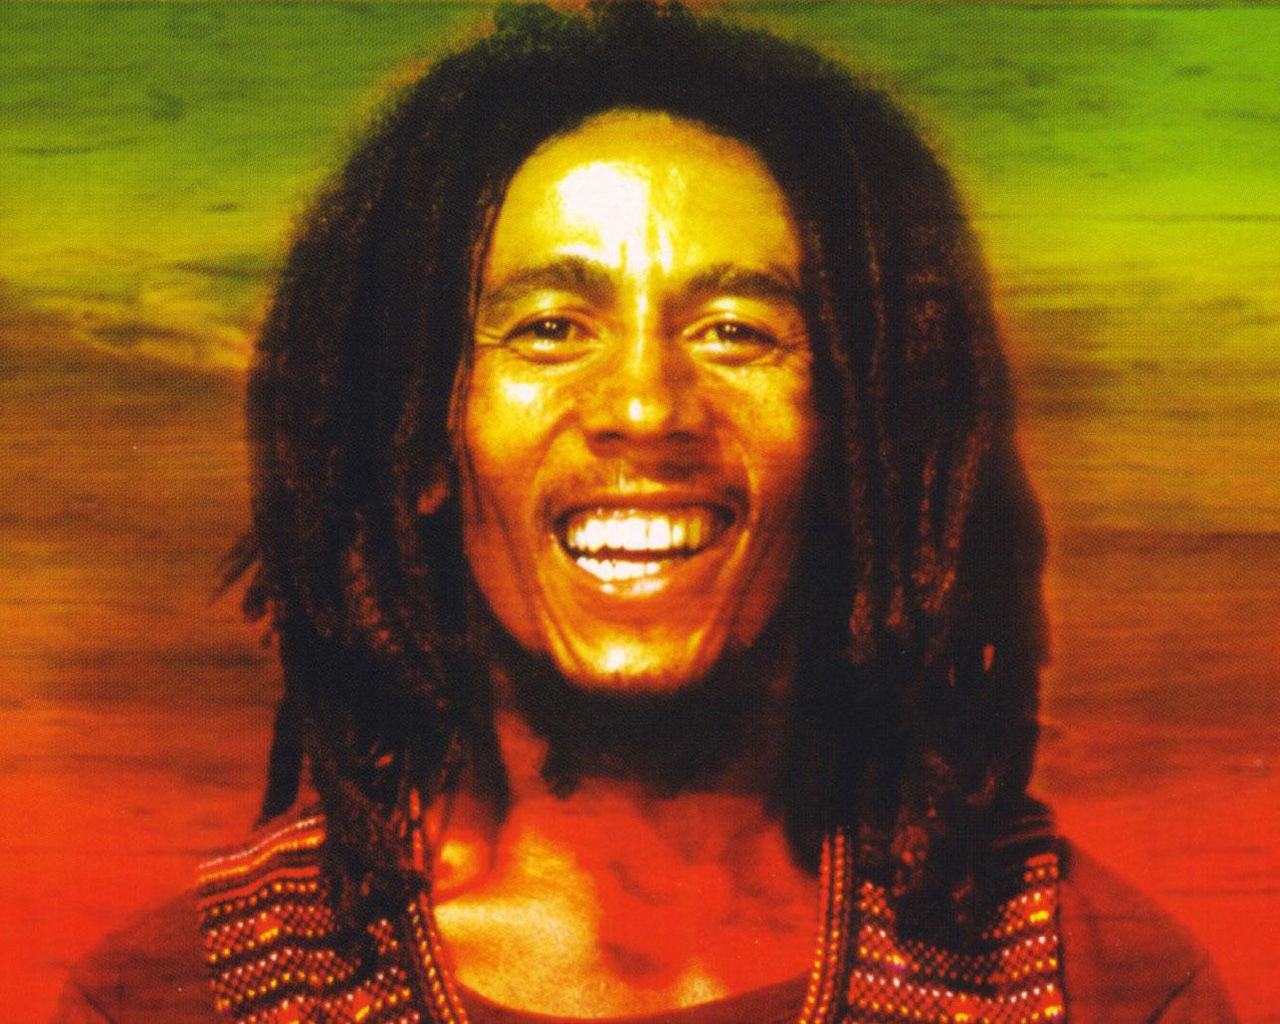 Bob Marley Give me just a little smile [vk.com/dbooster | bassboosted by n3cr0n]